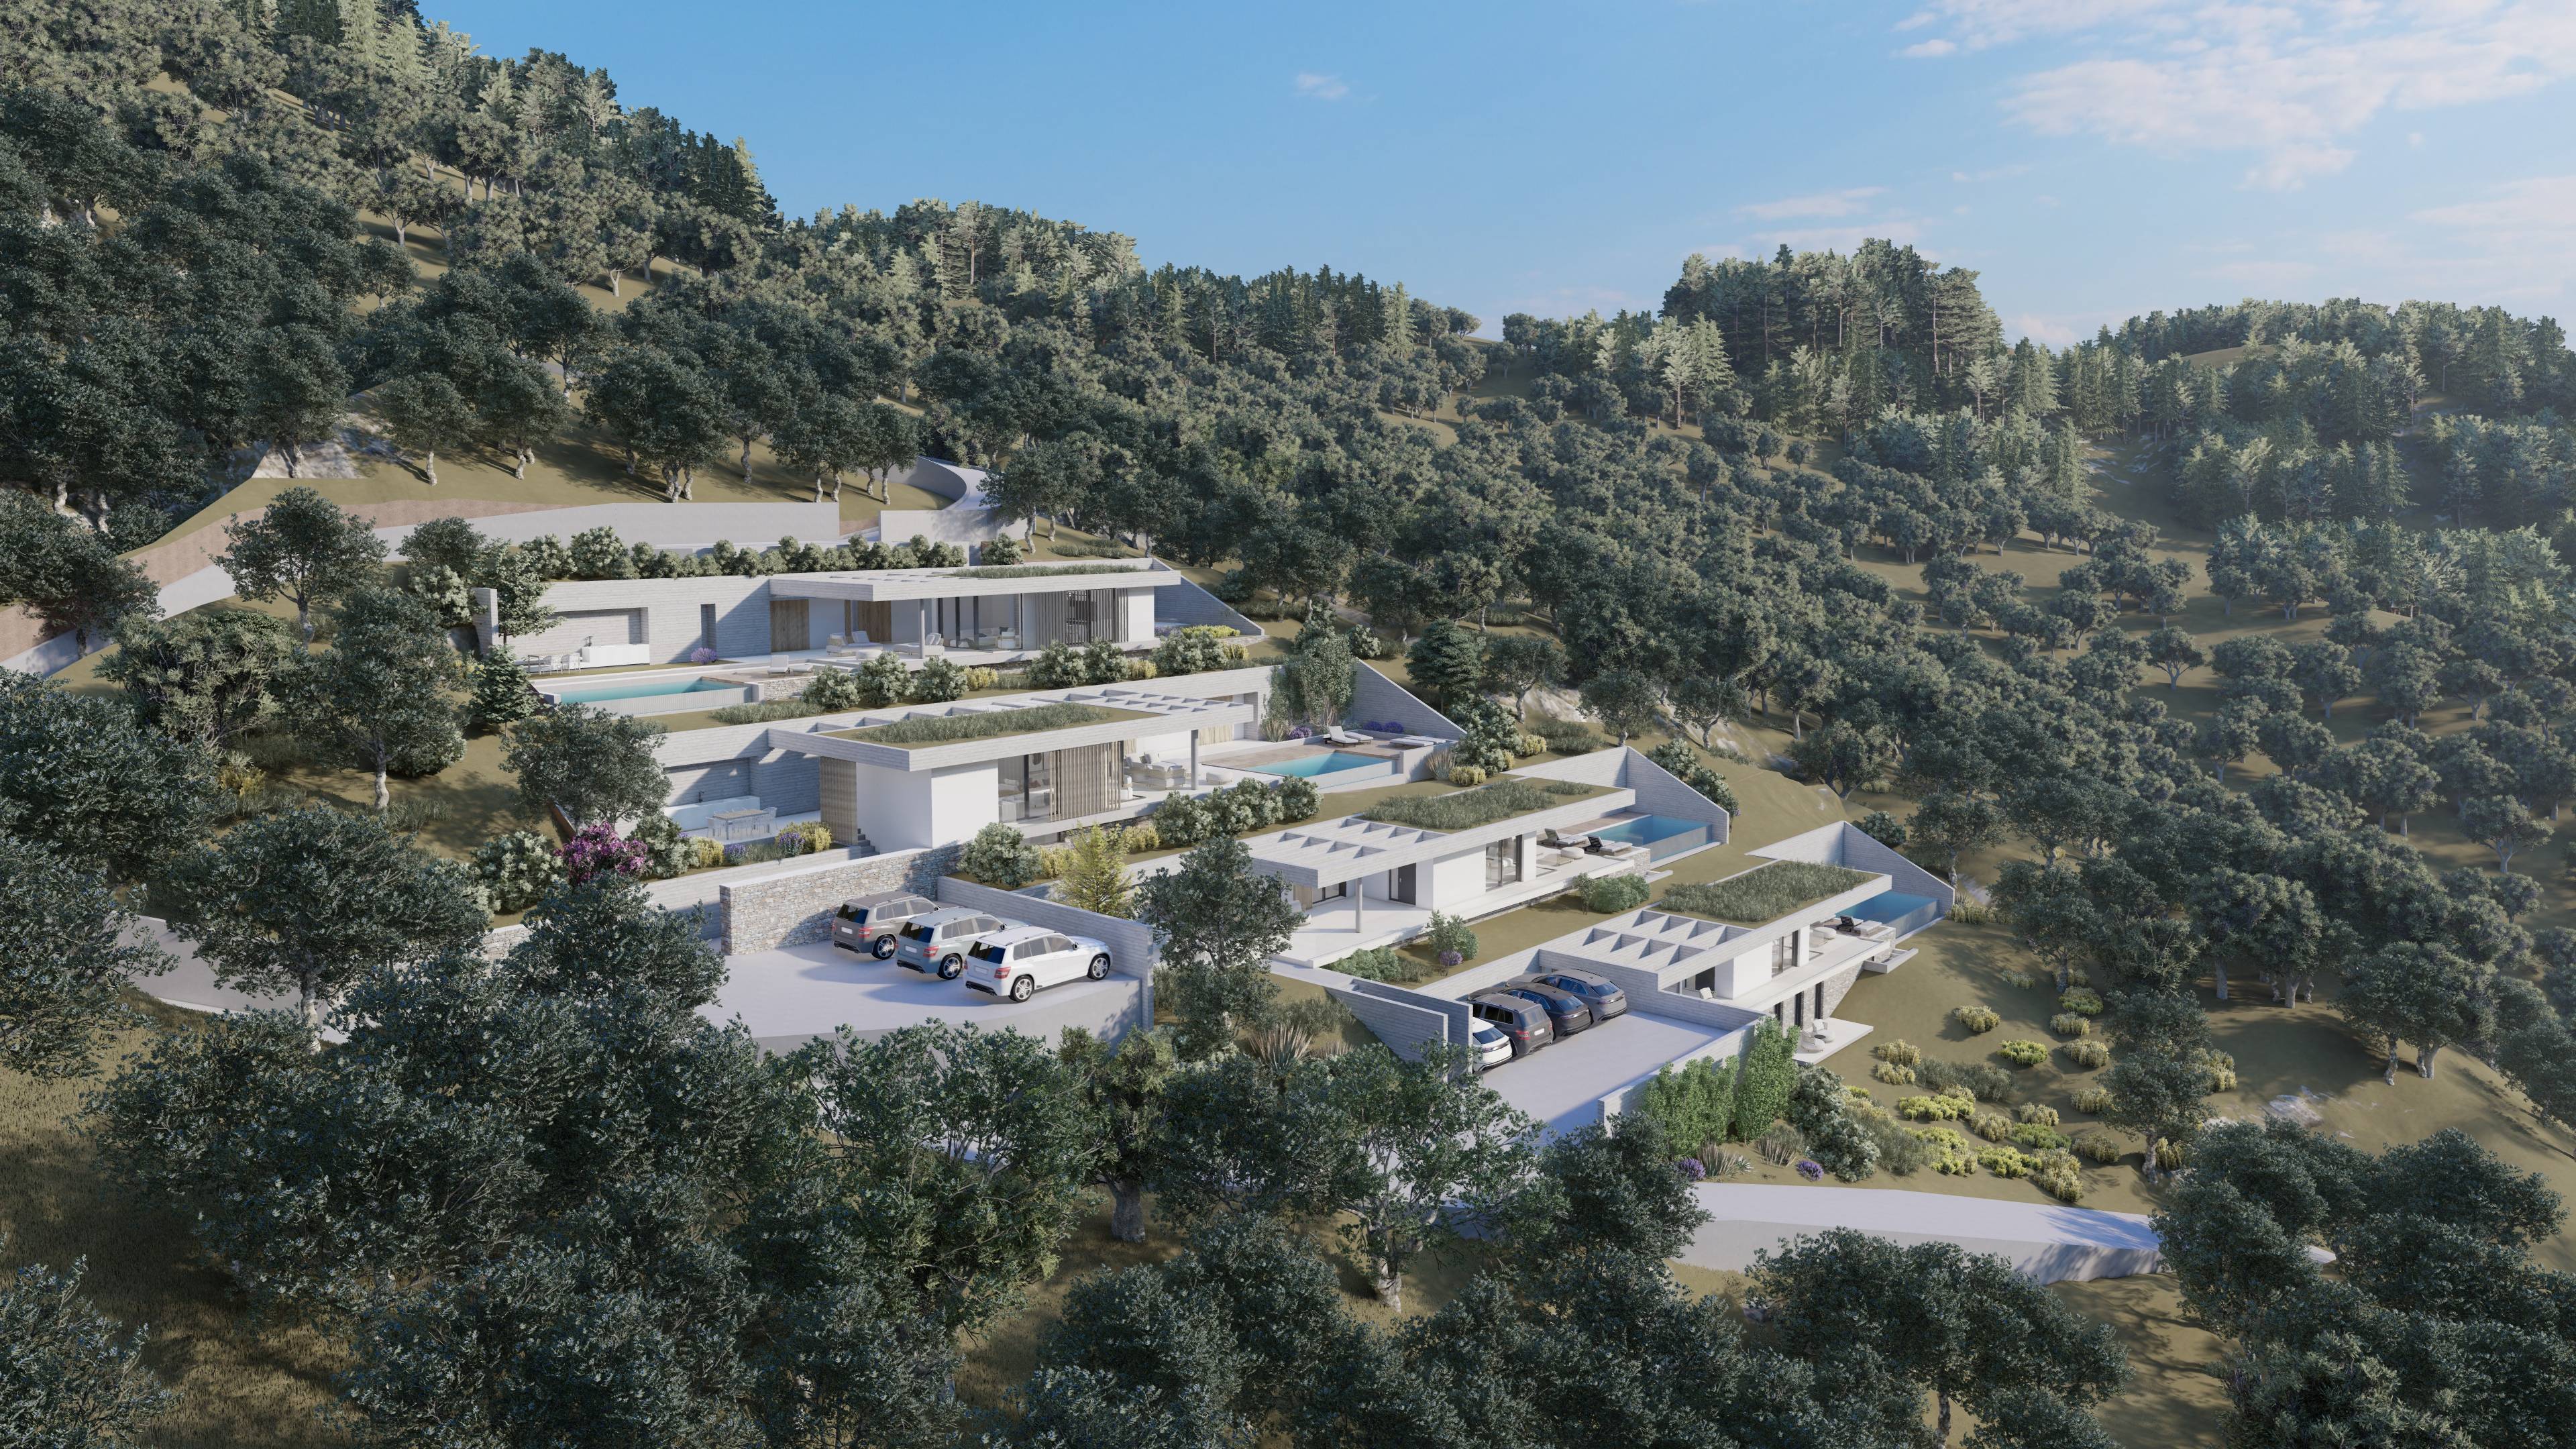 LUXURY MAGIC FOREST RETREAT VILLA VIII AMID SKIATHOS’ PRESERVED OLIVE GROVES: PRIME INVESTMENT OPPORTUNITY